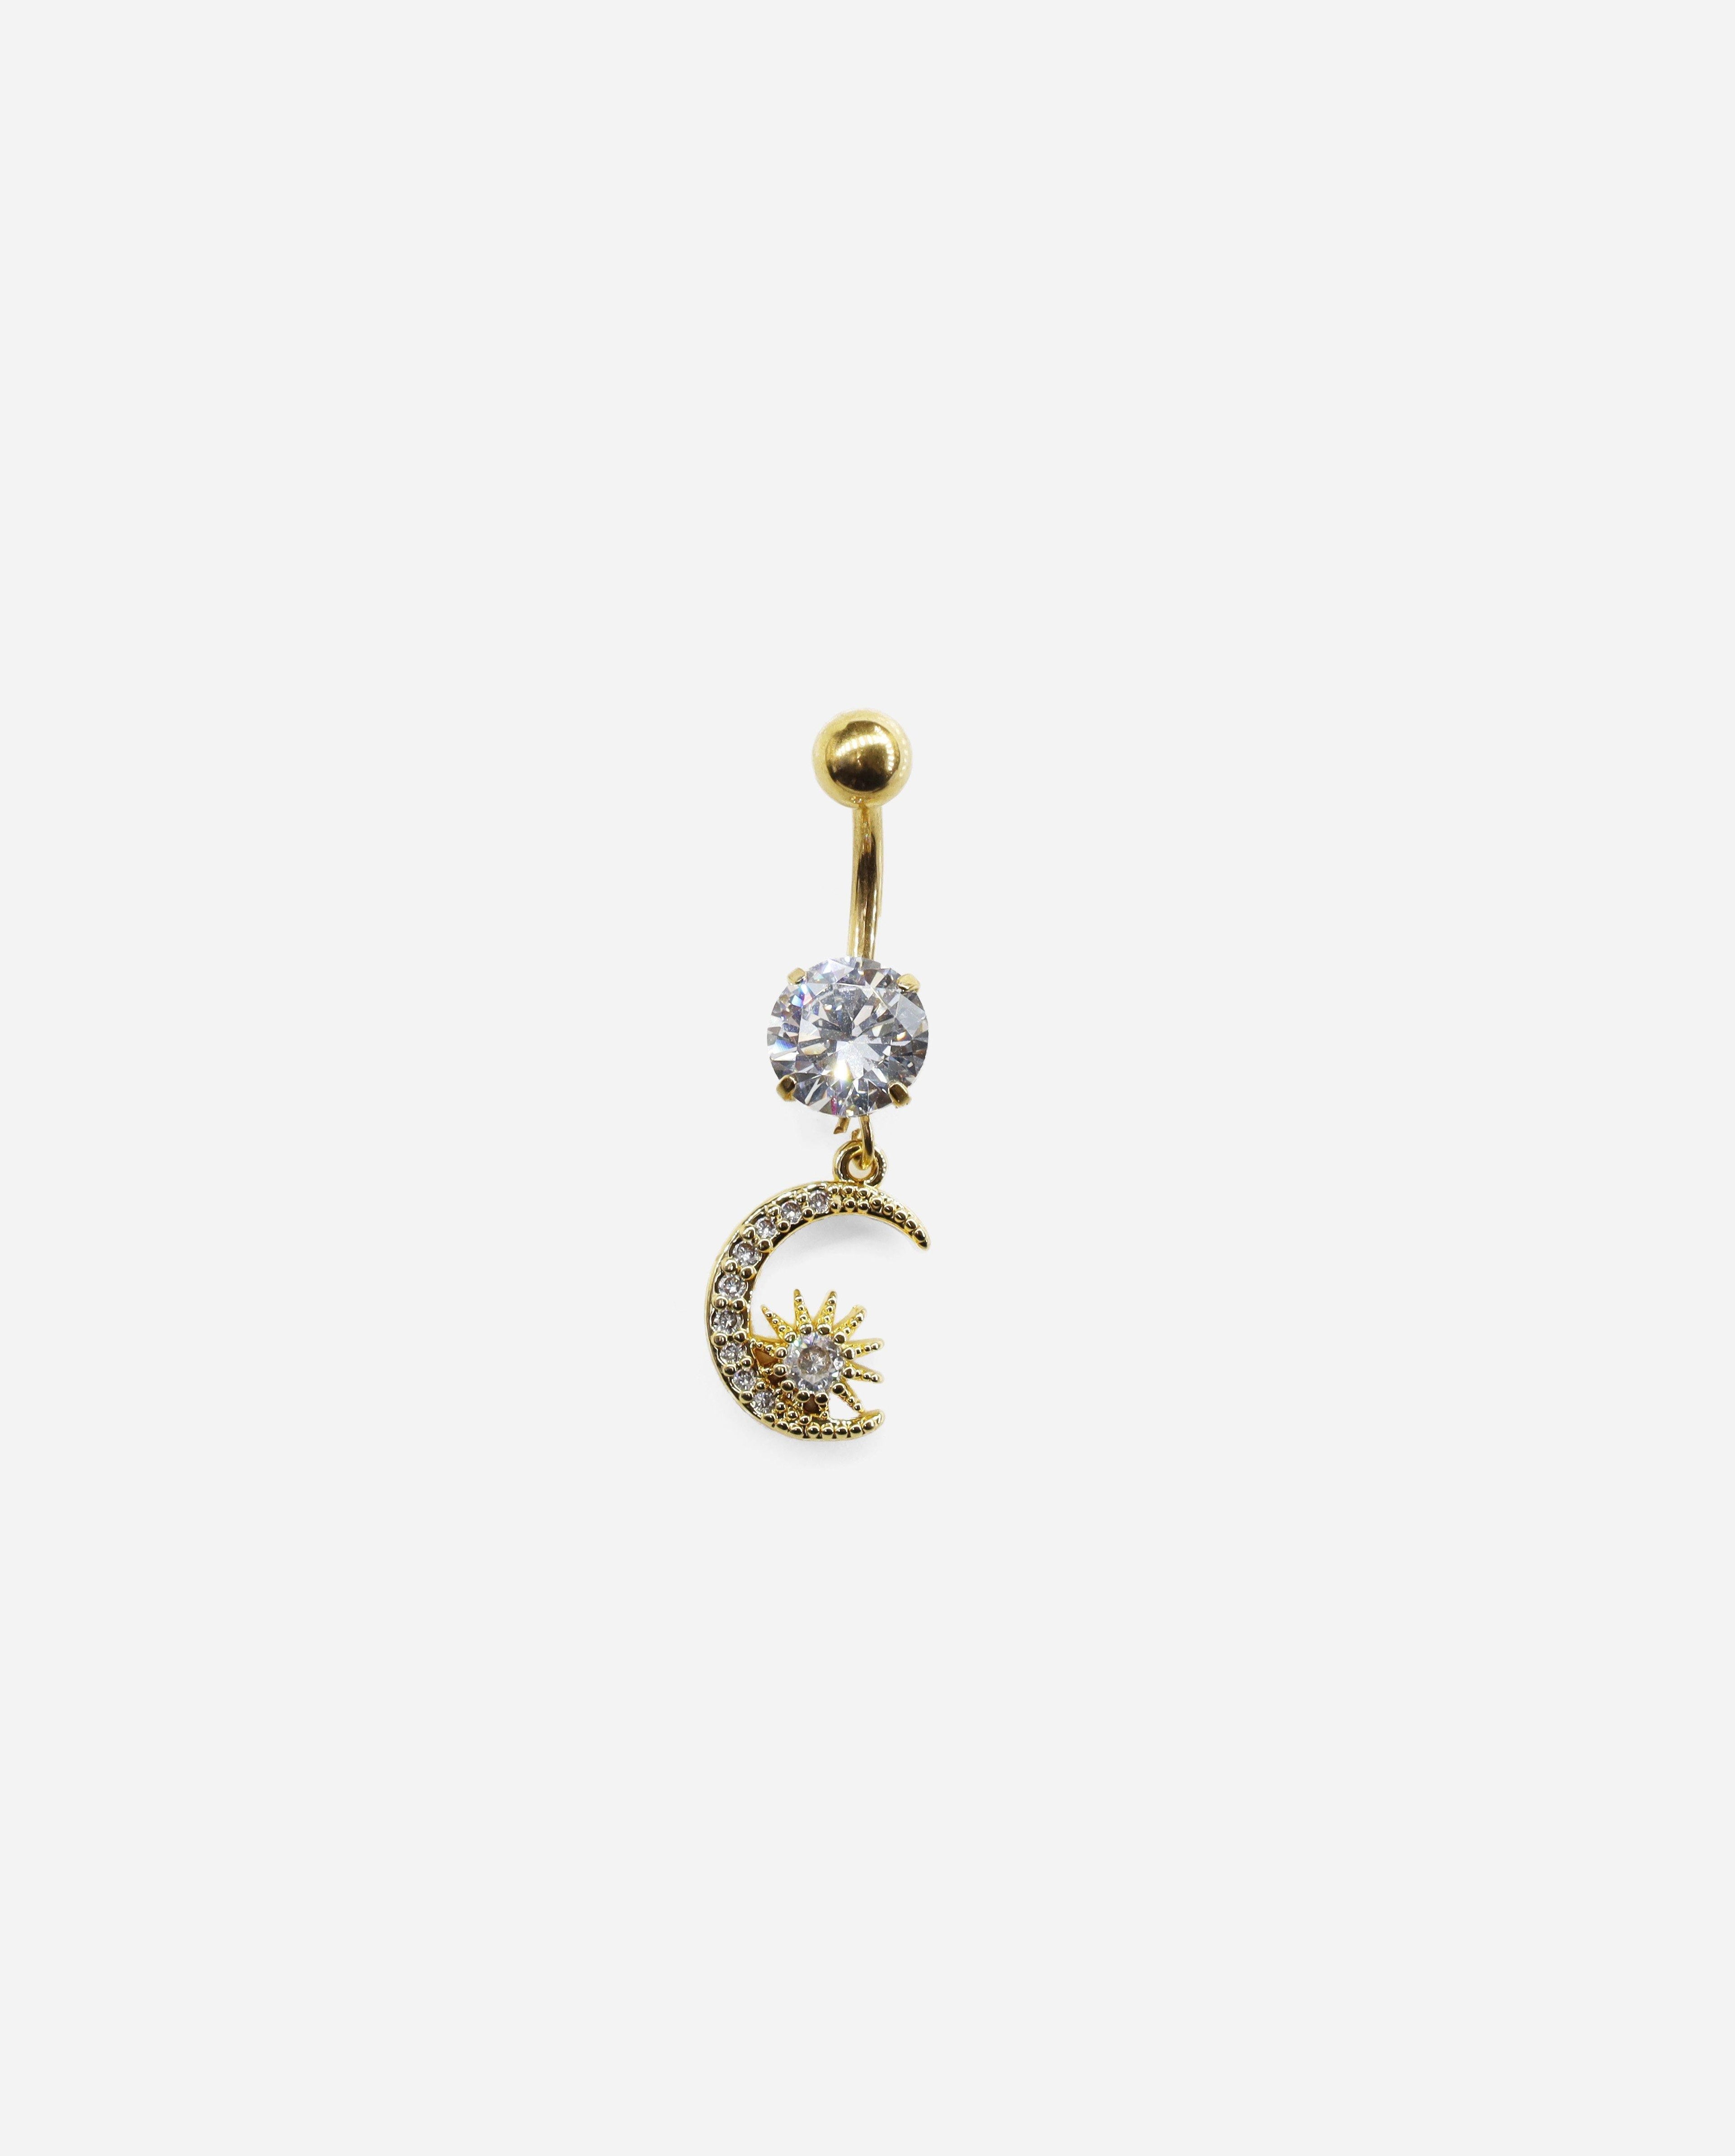 Gracias Dios Crescent Moon Dangle Belly Ring - Challenger Streetwear